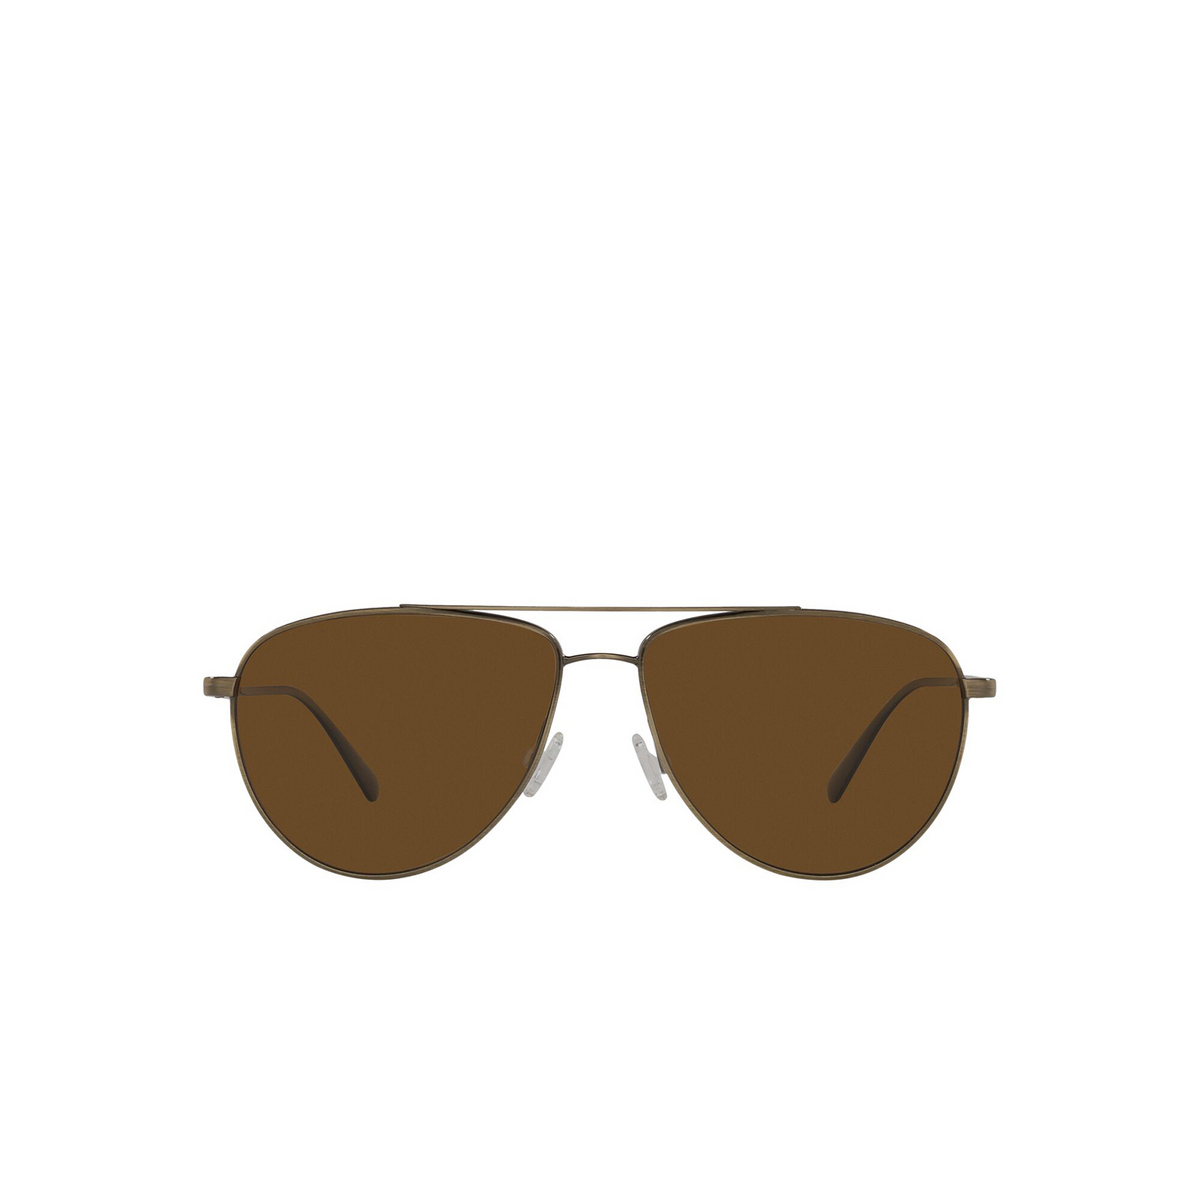 Oliver Peoples® Aviator Sunglasses: Disoriano OV1301S color Antique Gold 528457 - front view.